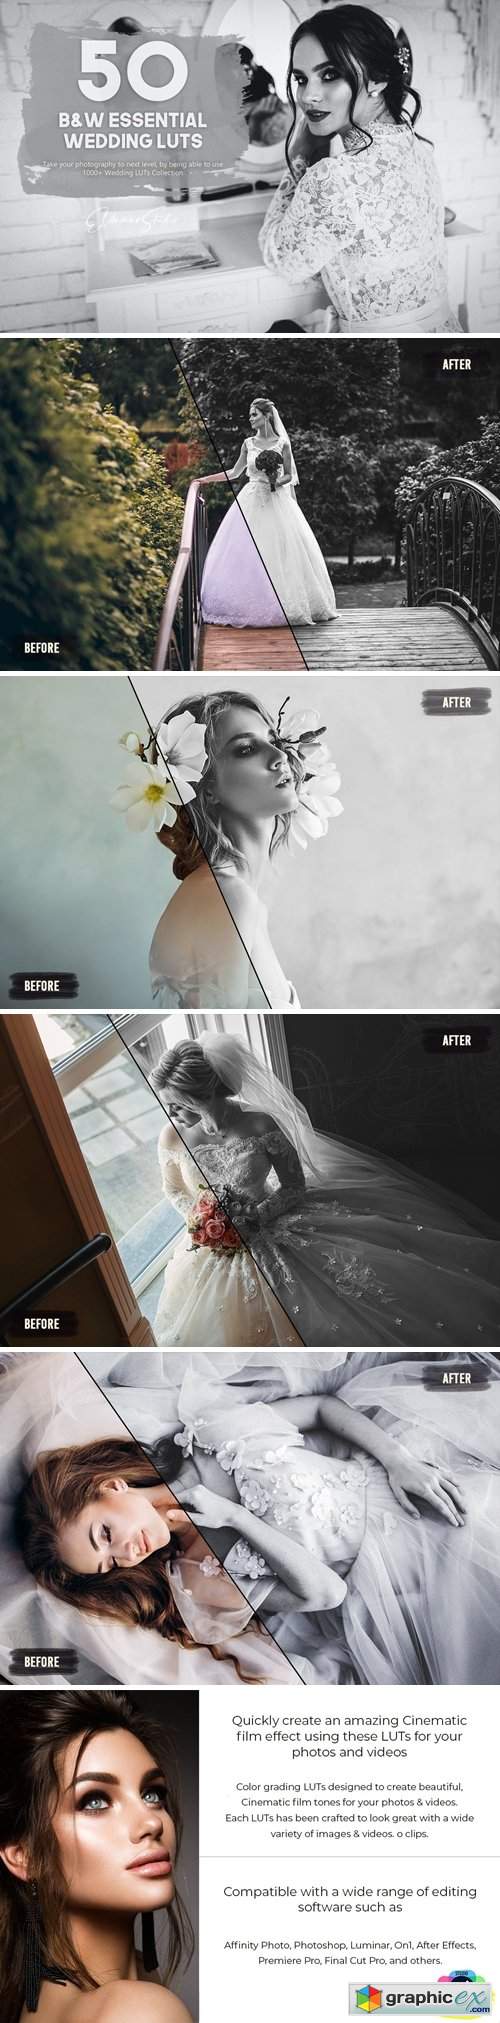  50 Black and White Essential Wedding LUTs Pack 